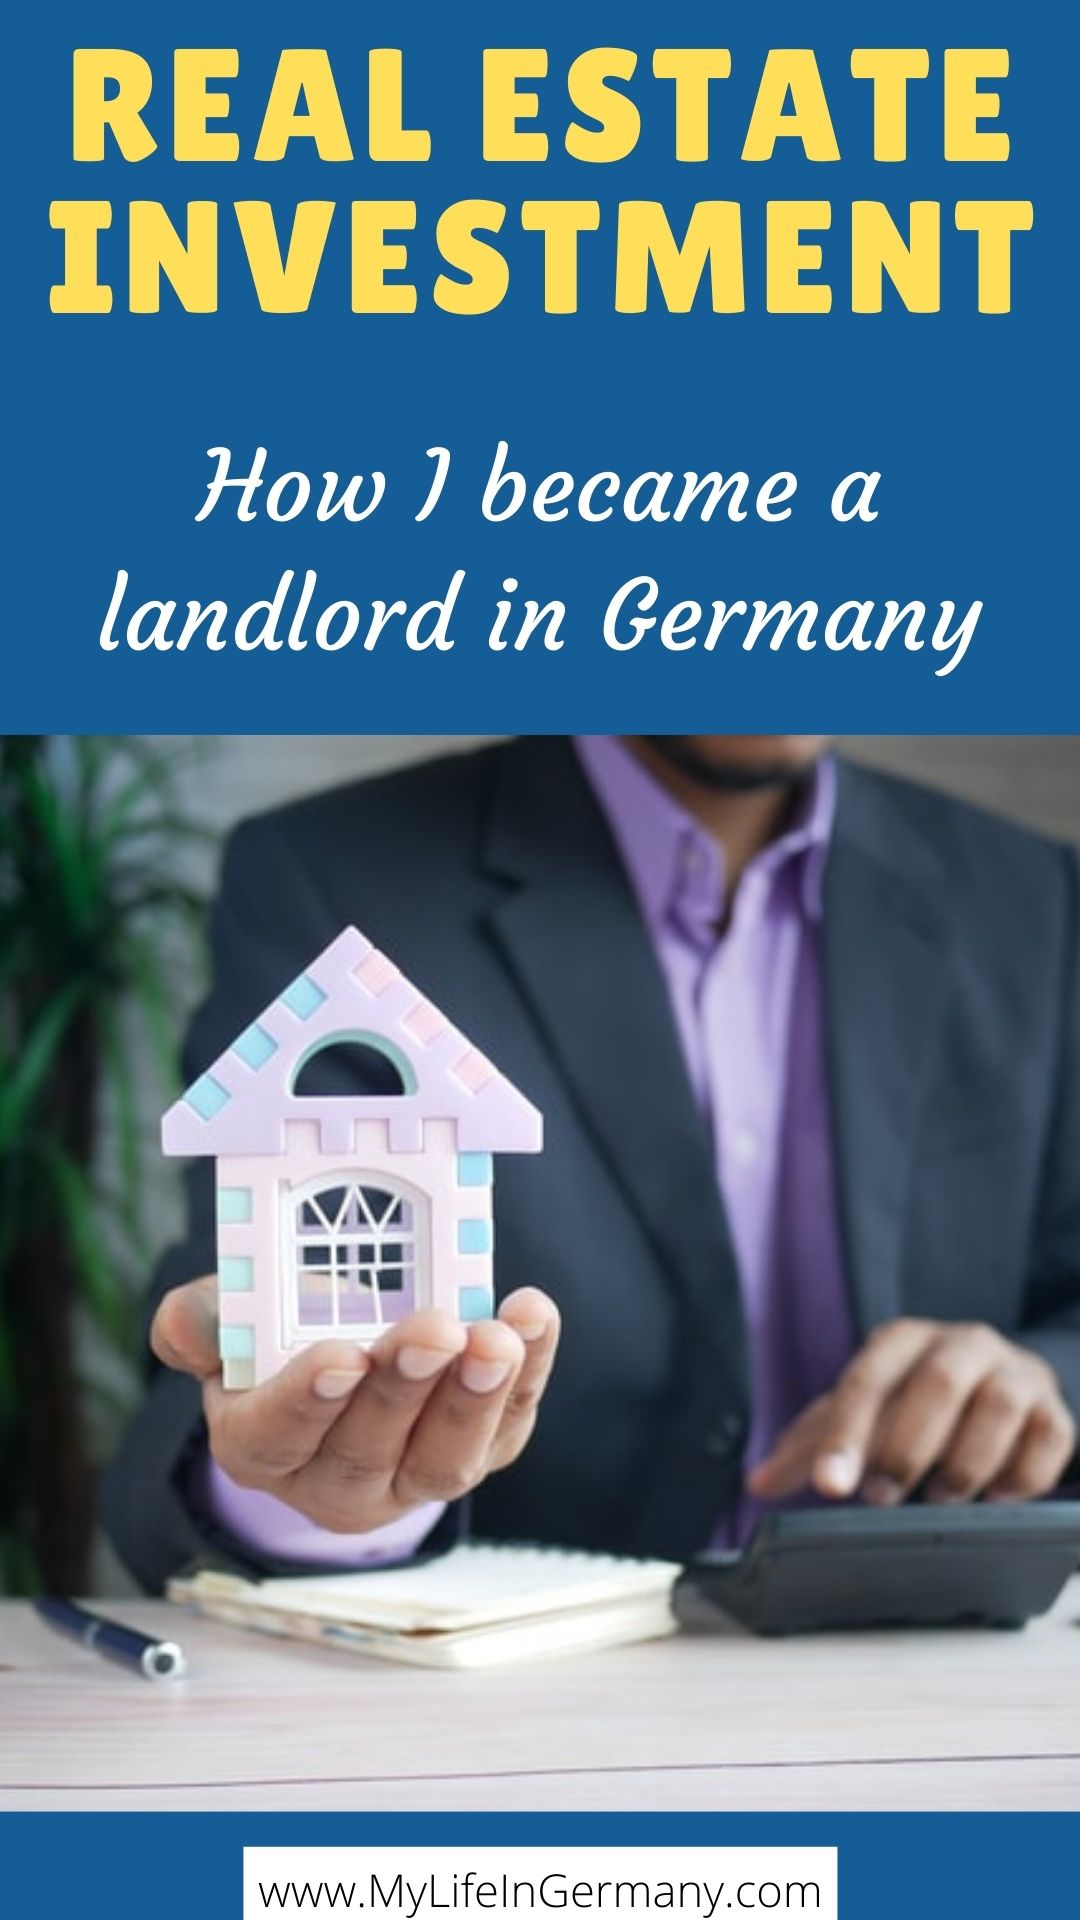 pinterest edited_real estate investment in germany_how I became a landlord_investment property_hkwomanabroad_my life in germany